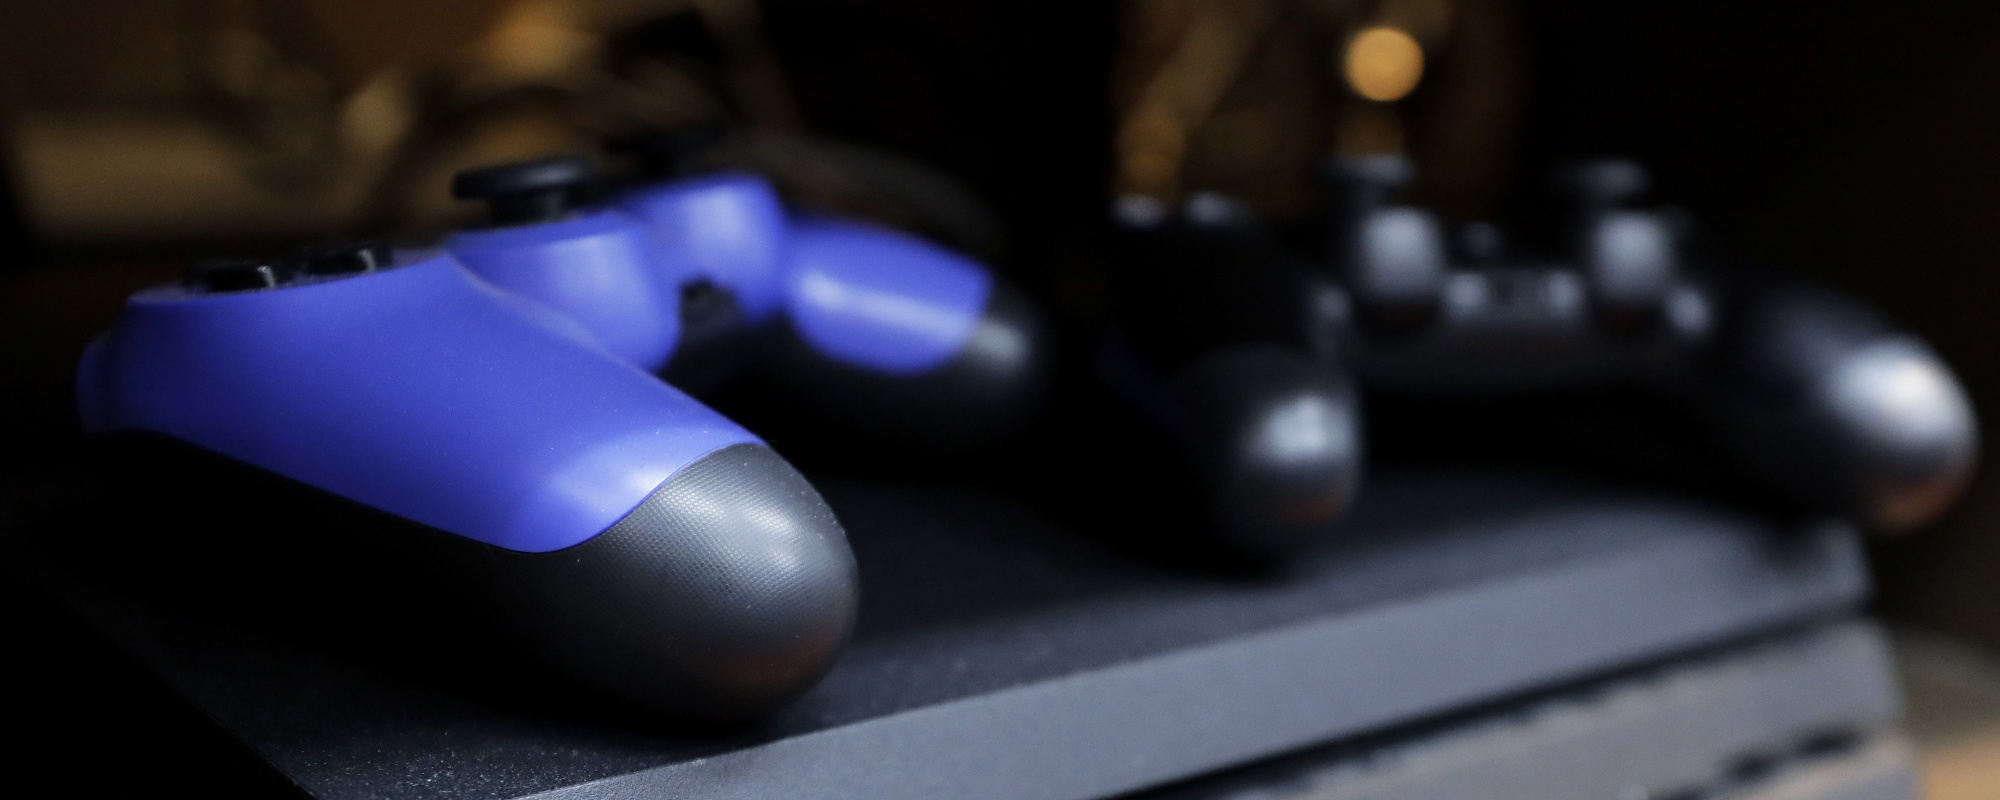 Sony's Access controller for the PlayStation aims to make gaming easier for  people with disabilities, ET Telecom